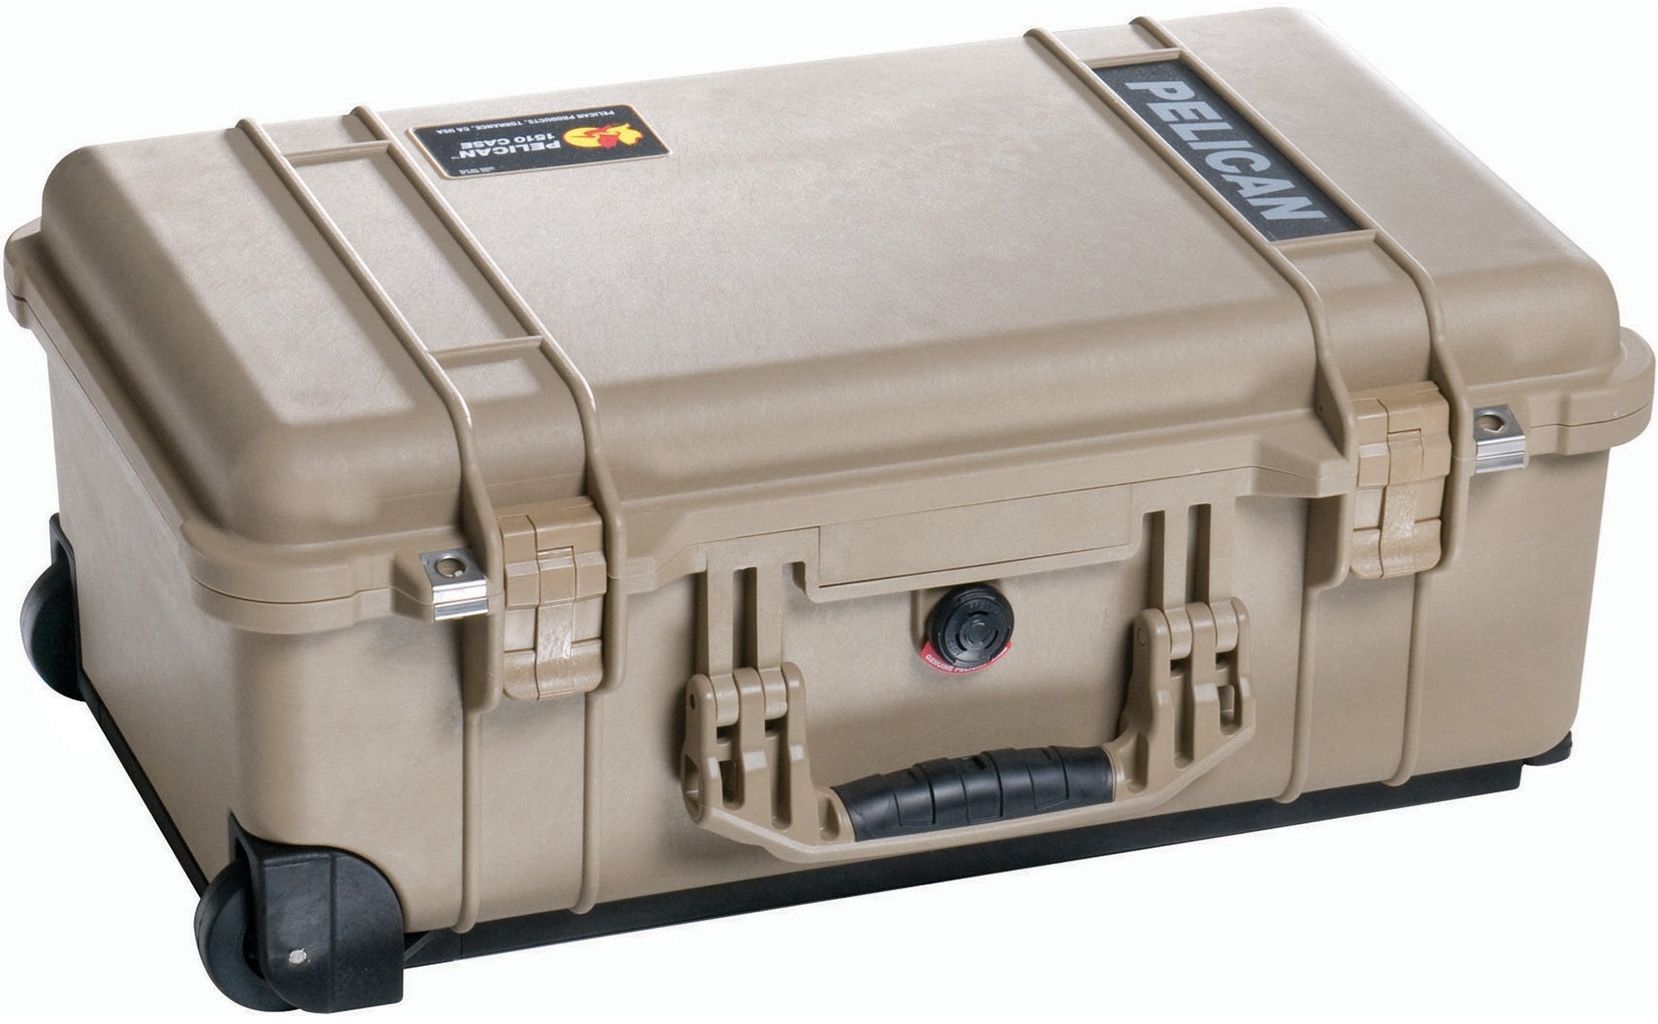 Image of Pelican 1510 Desert Storm Carry On Case